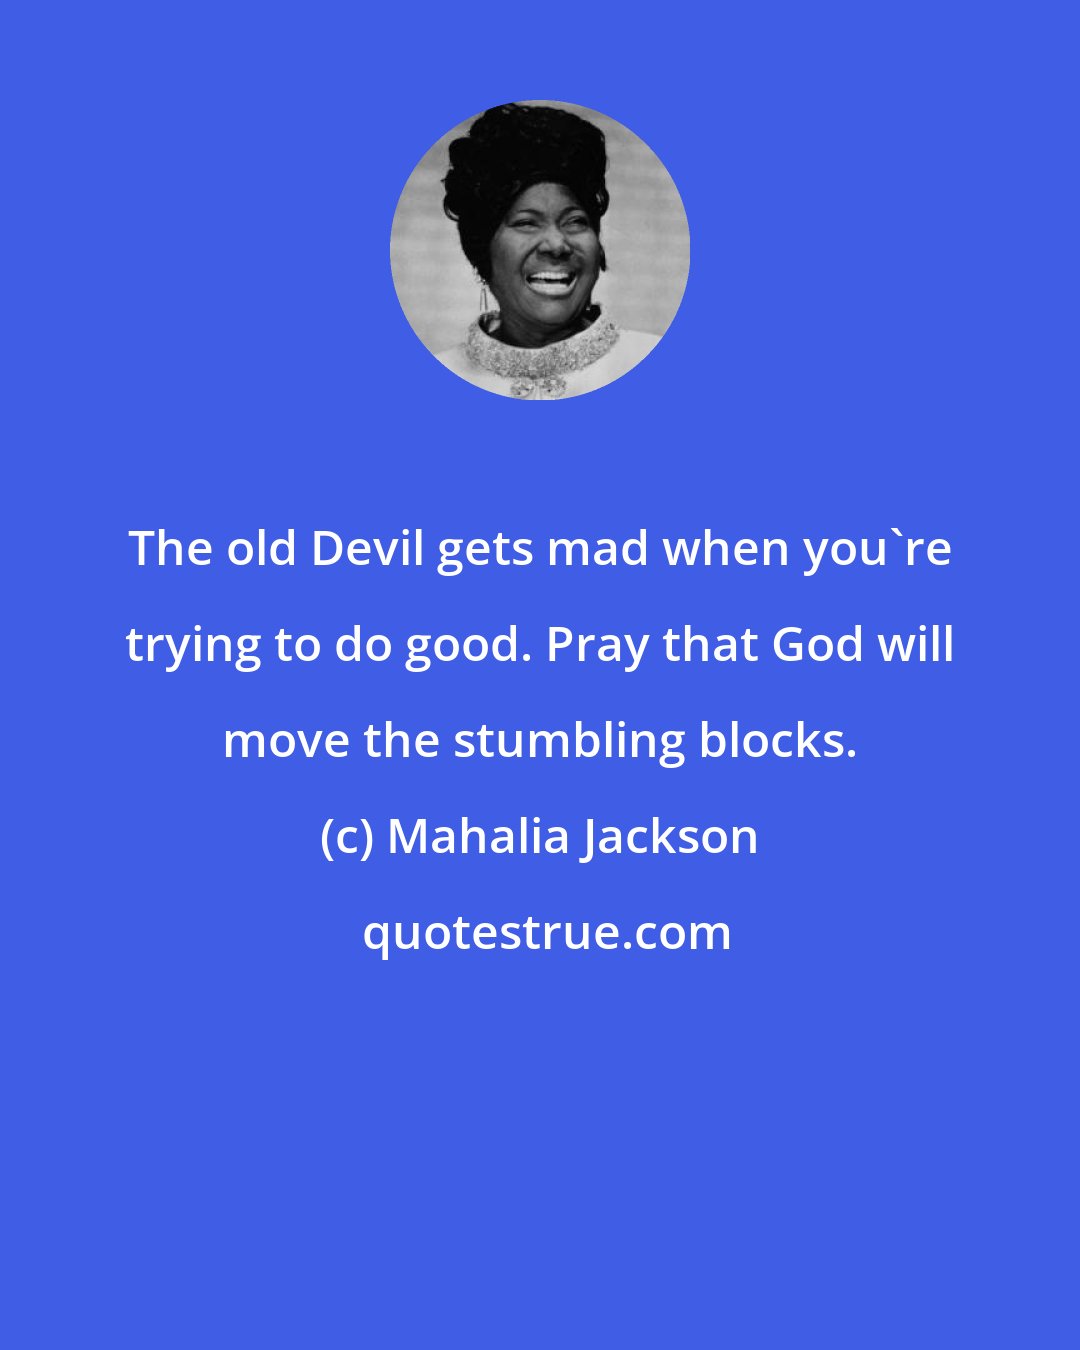 Mahalia Jackson: The old Devil gets mad when you're trying to do good. Pray that God will move the stumbling blocks.